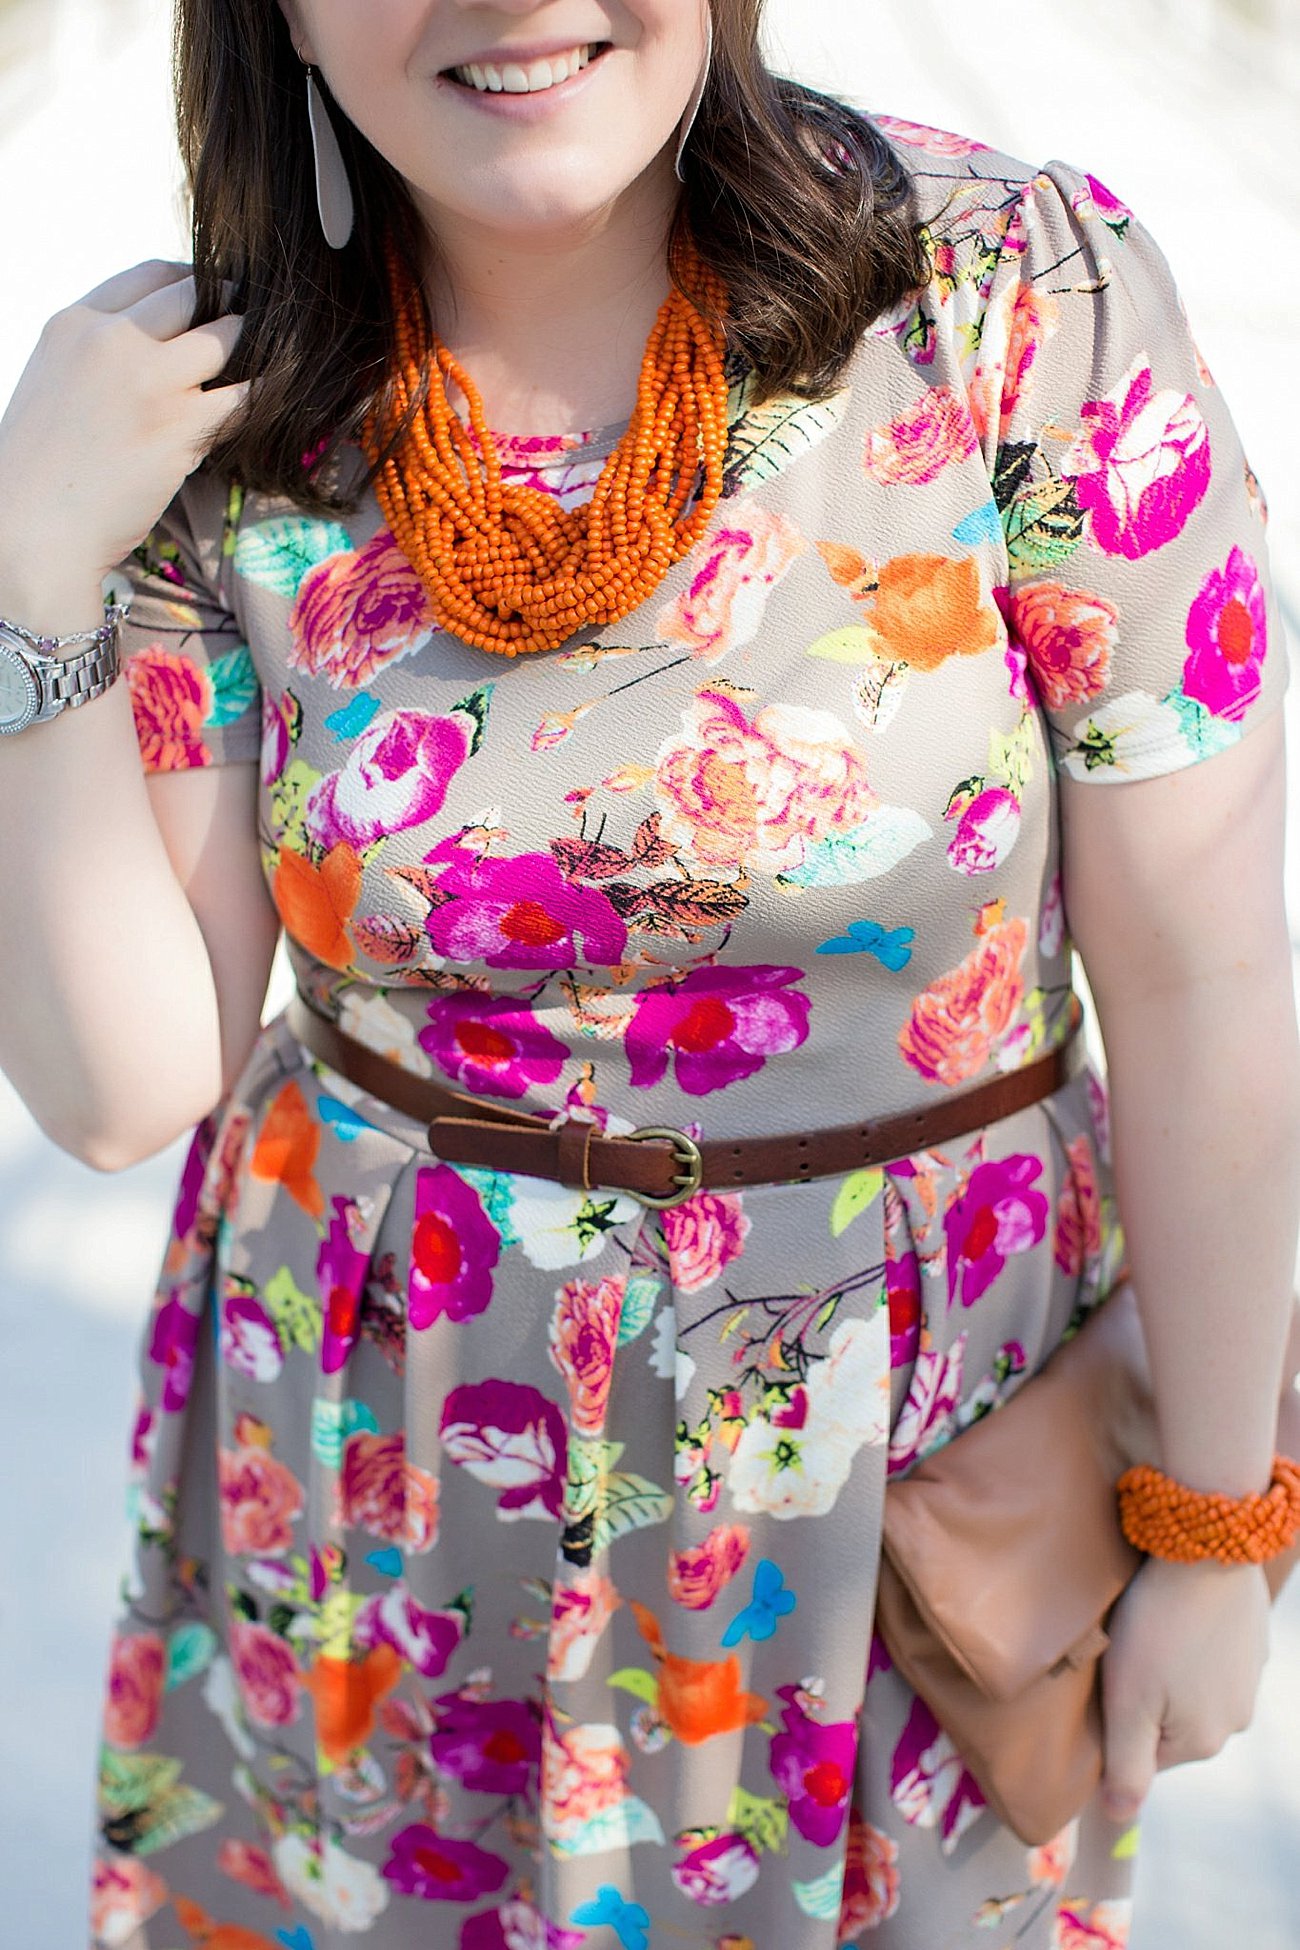 LulaRoe Floral Amelia Dress, The Root Collective Millie Smoking Shoe, Made for Freedom Lily Necklace and Bracelet, Sseko Designs Leather Clutch, Nickel and Suede earrings | Mom Style | North Carolina Fashion & Style Blogger (4)